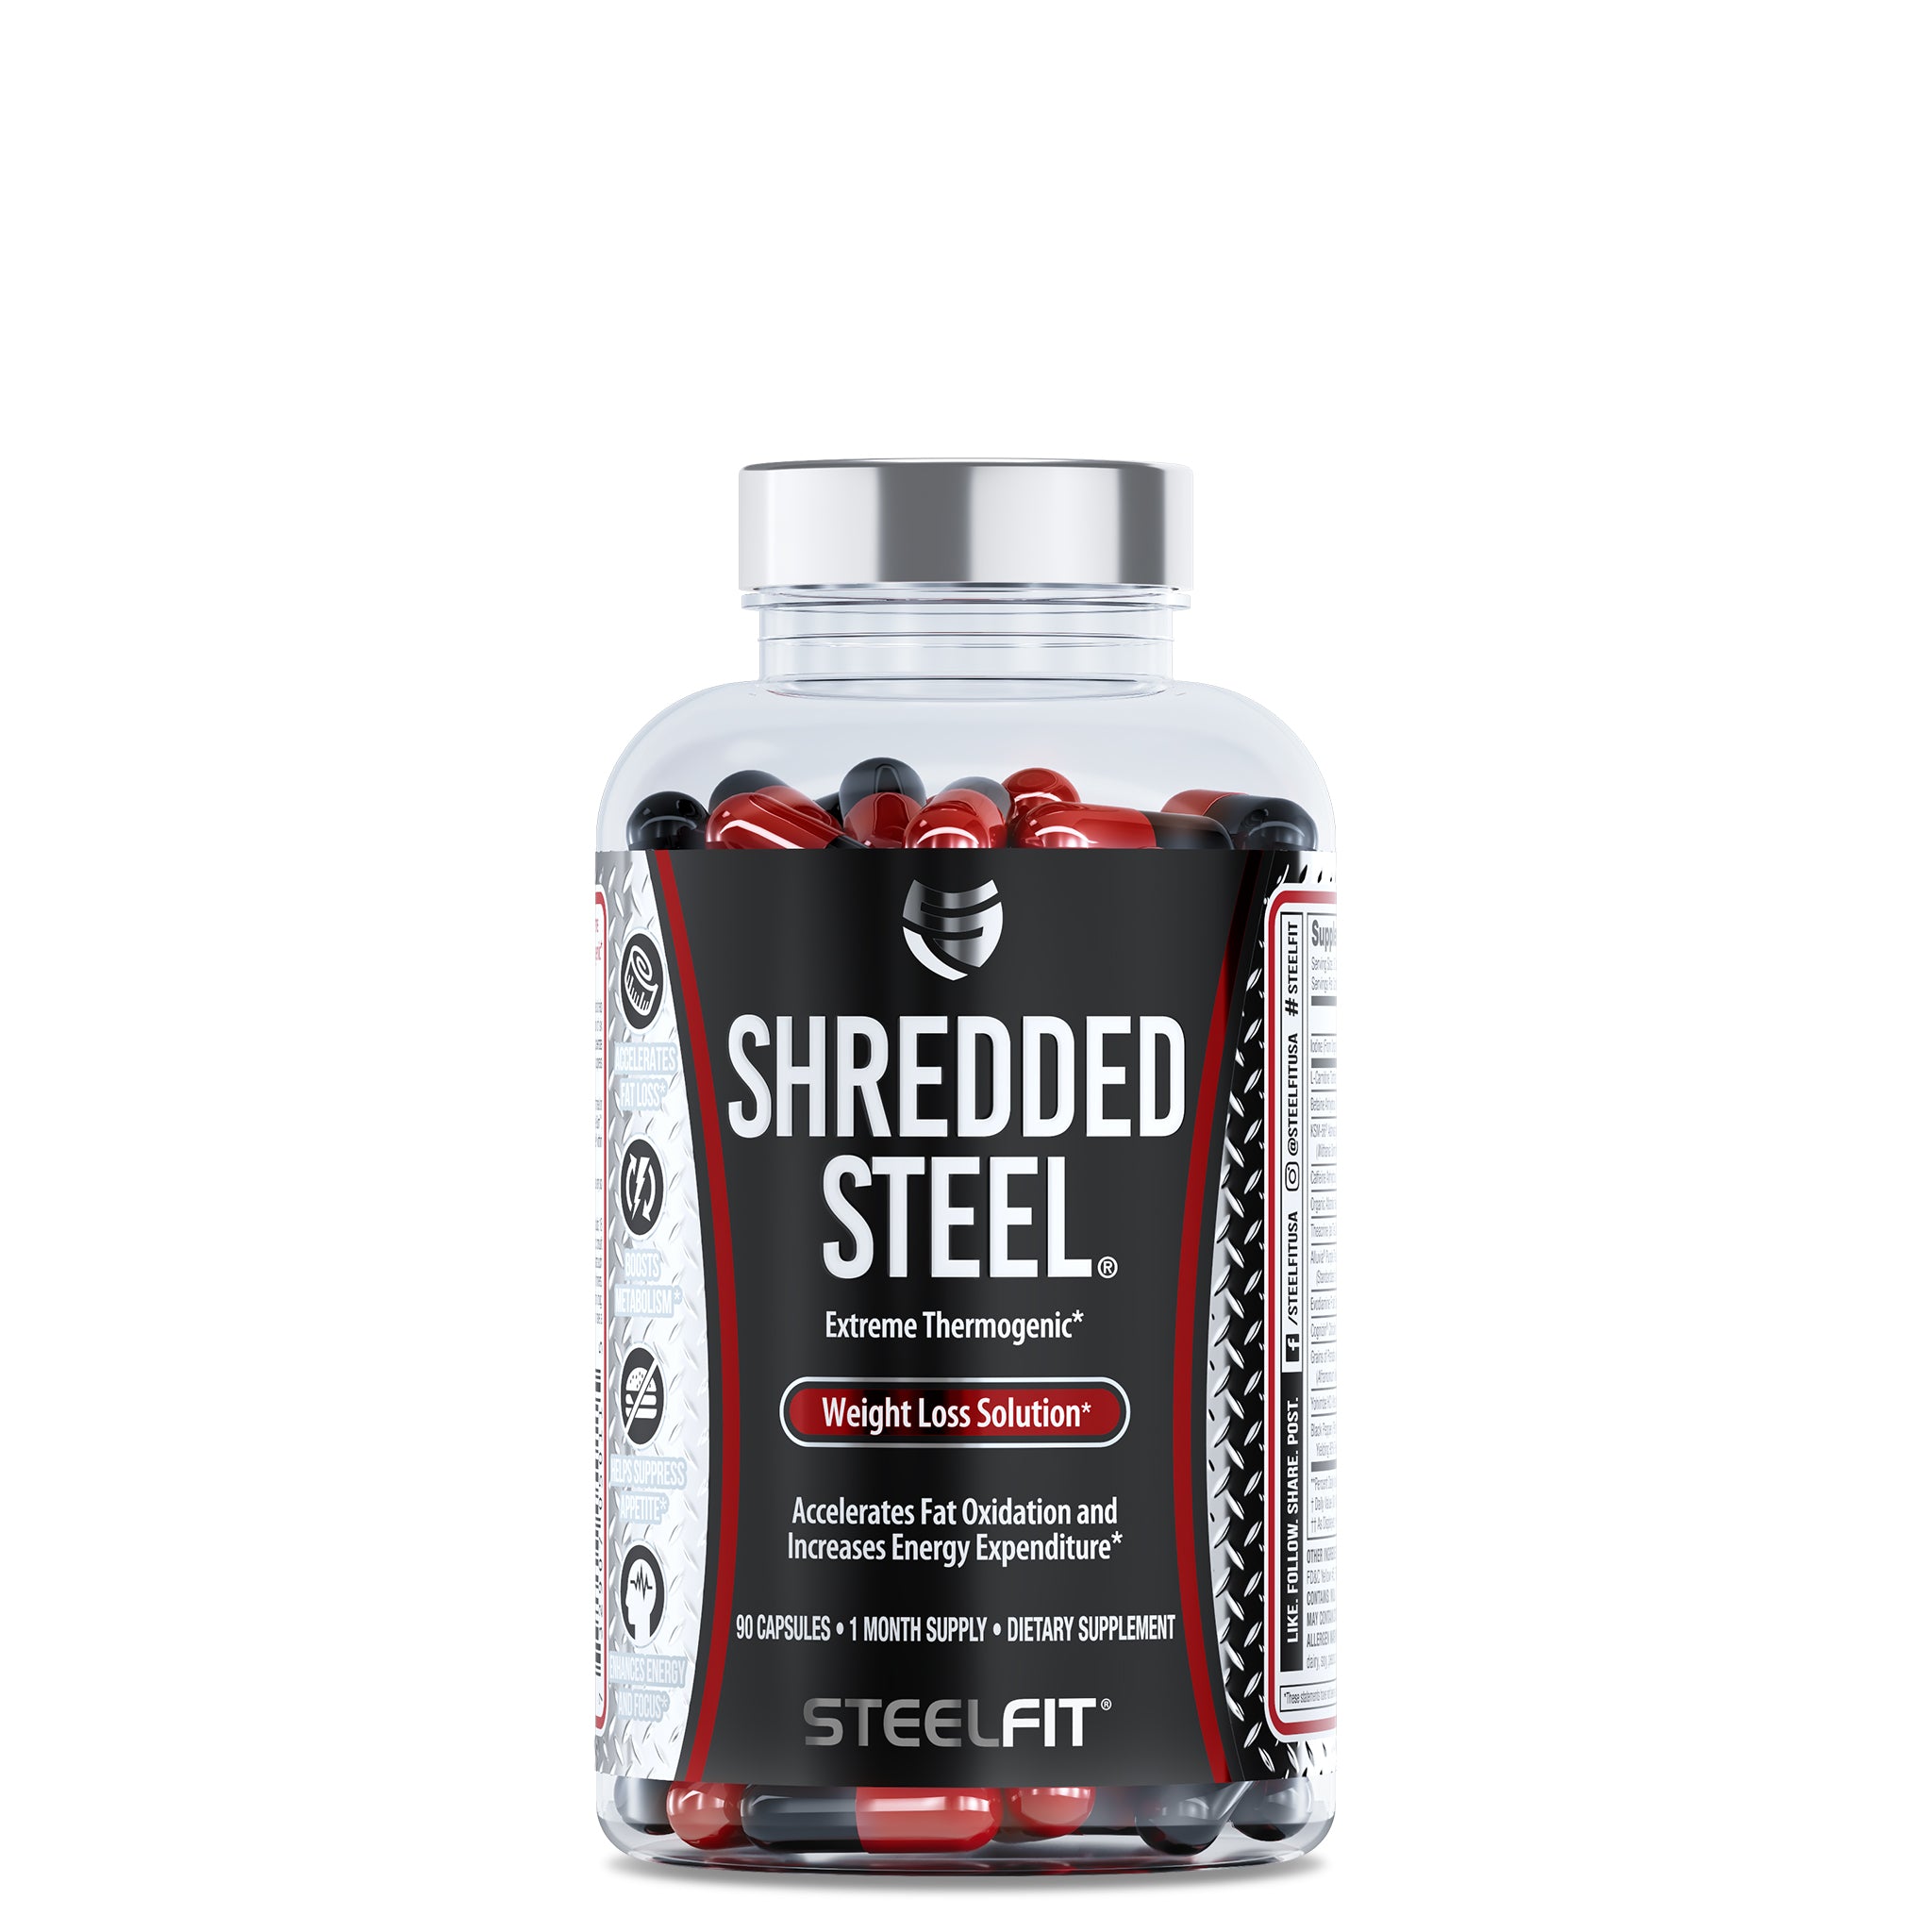 Shredded Steel extreme thermogenic fat burner paradoxine grains of paradise and teacrine and purple tea #1 rated fat burner of 2019